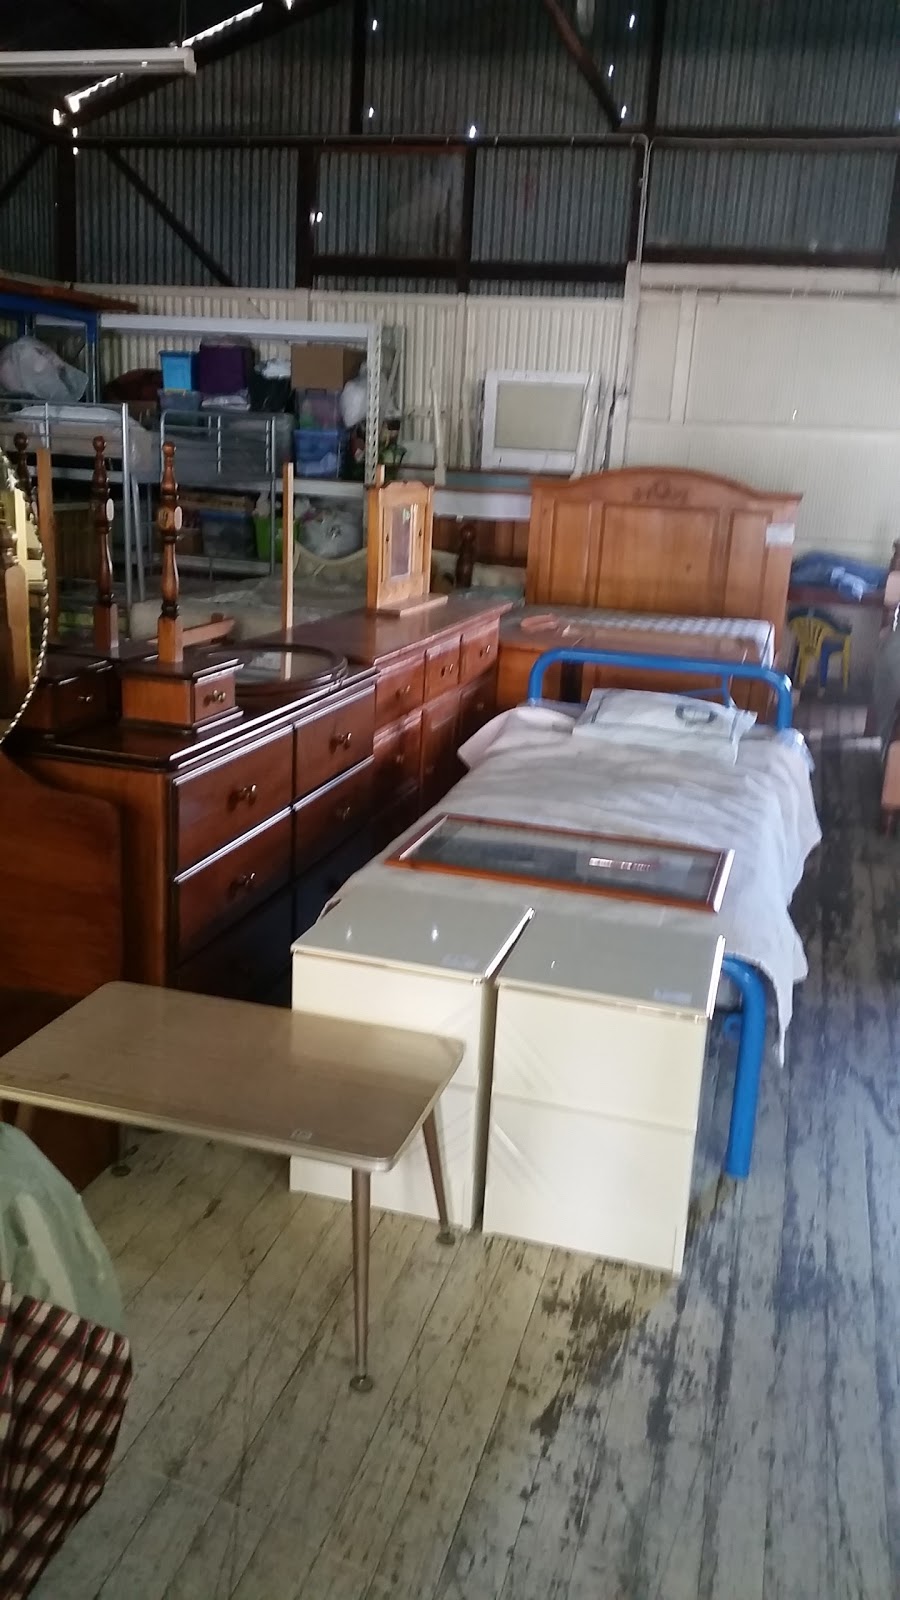 Laidley Secondhand Shop | store | 10 William St, Laidley QLD 4341, Australia | 0401911533 OR +61 401 911 533